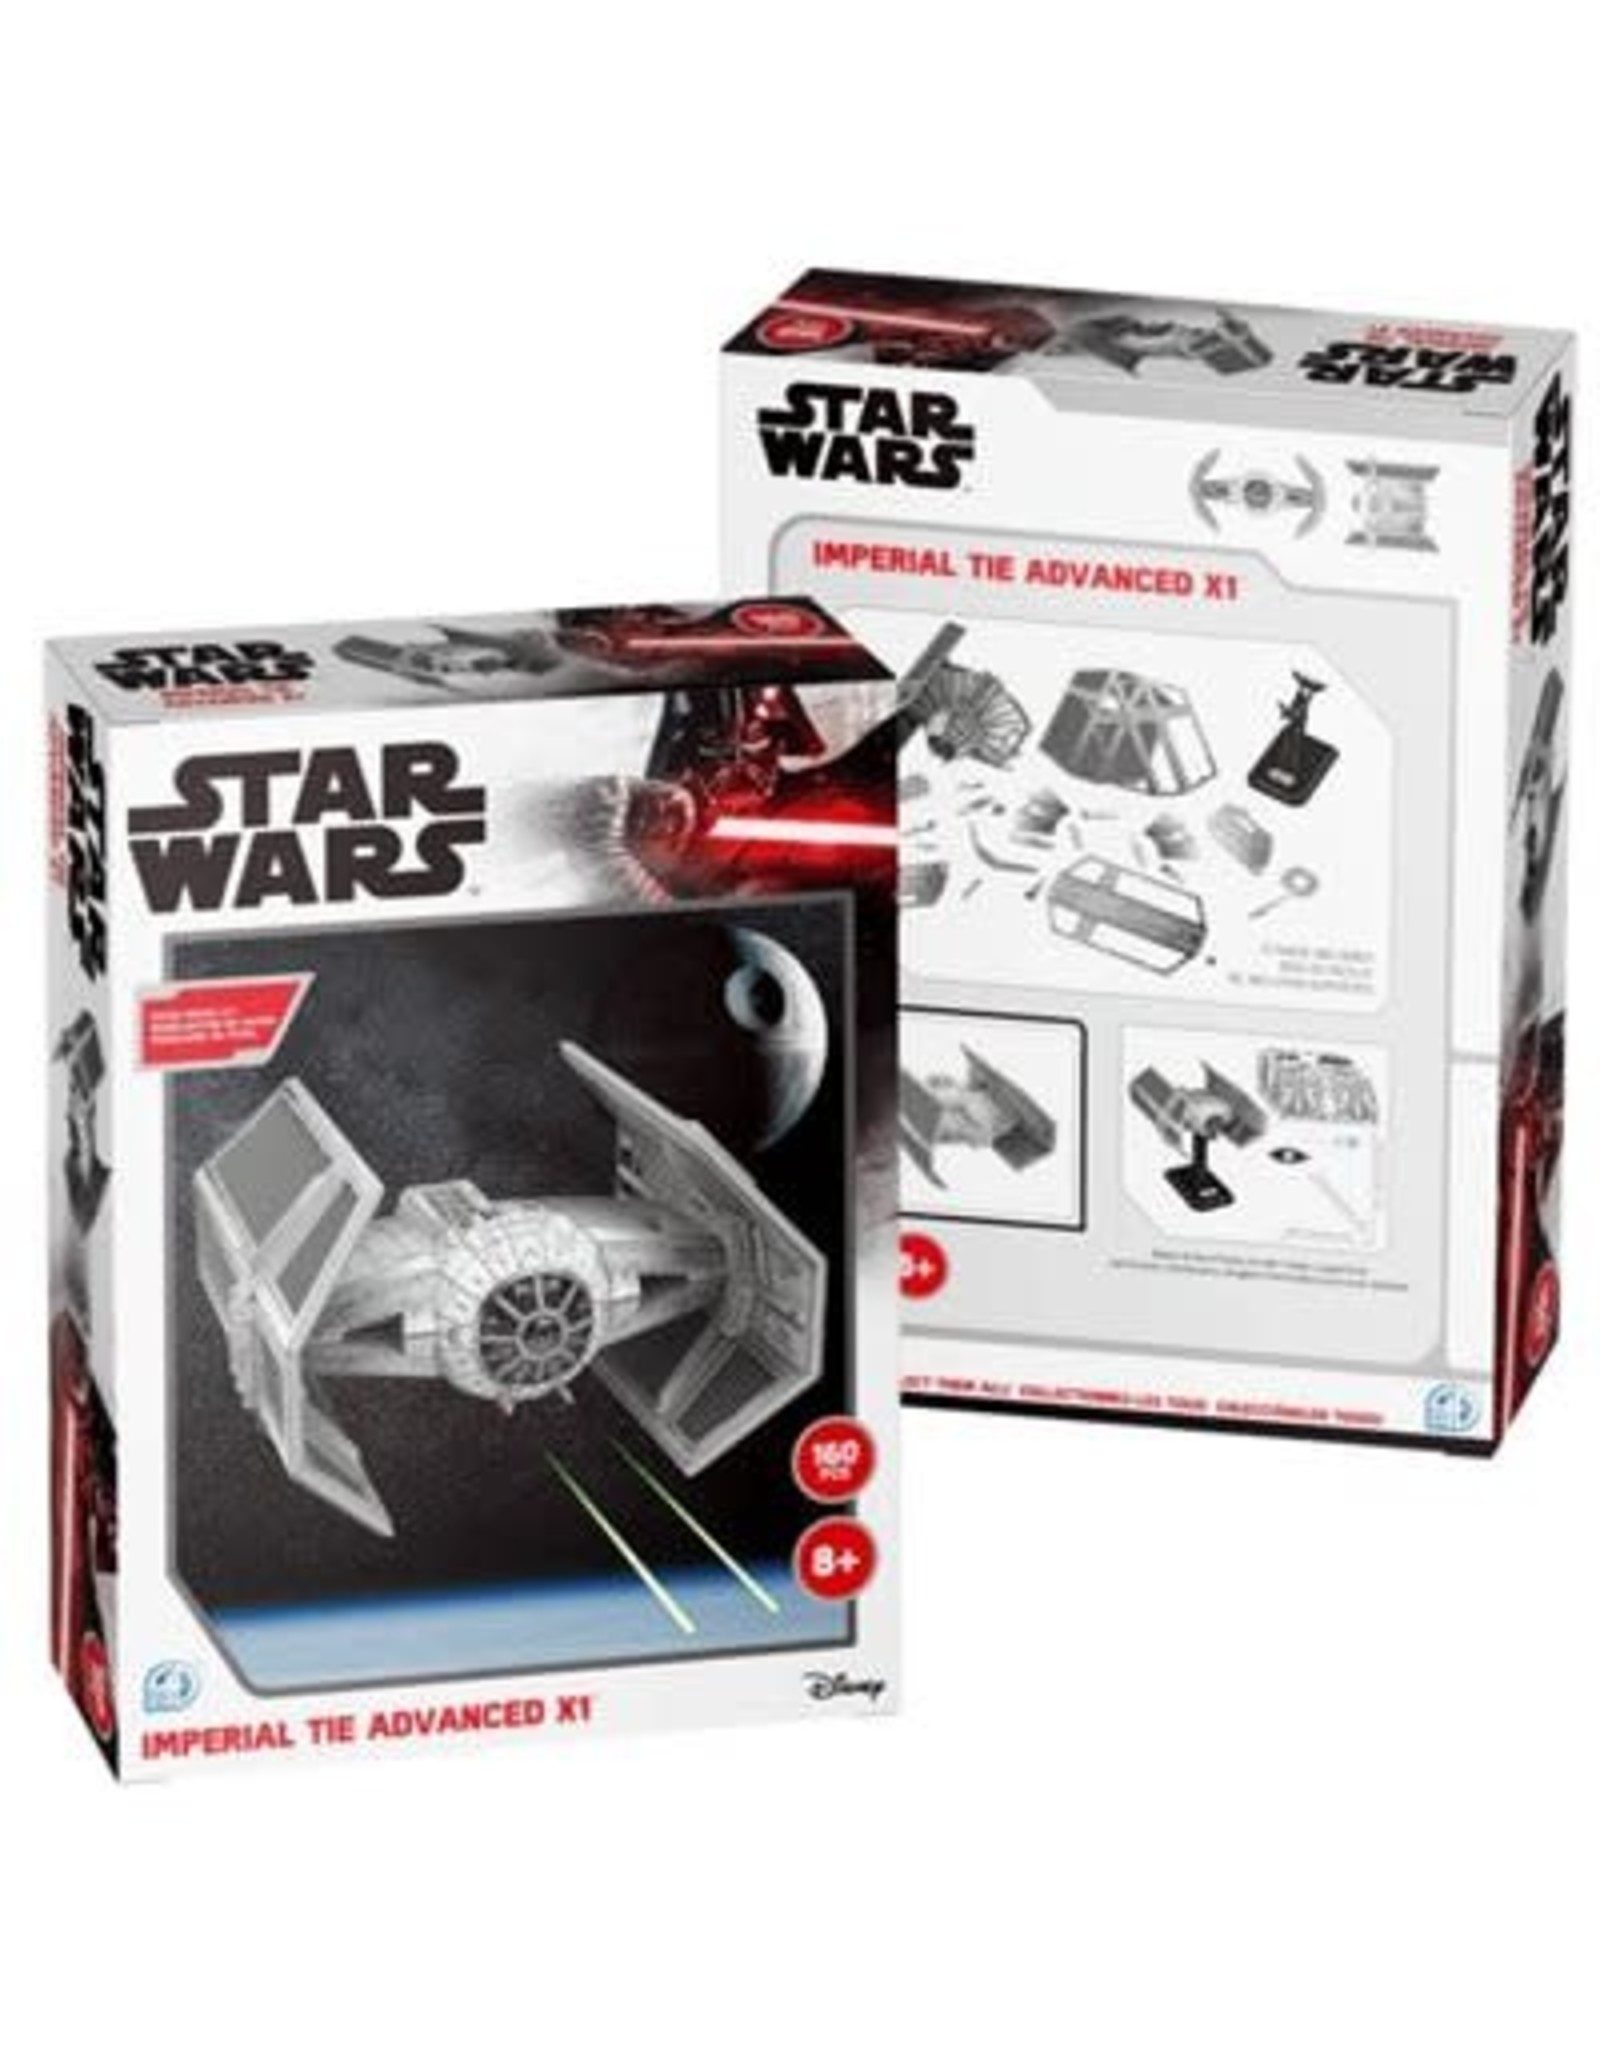 3D Puzzle: Star Wars Imperial TIE Advance X1  Fighter